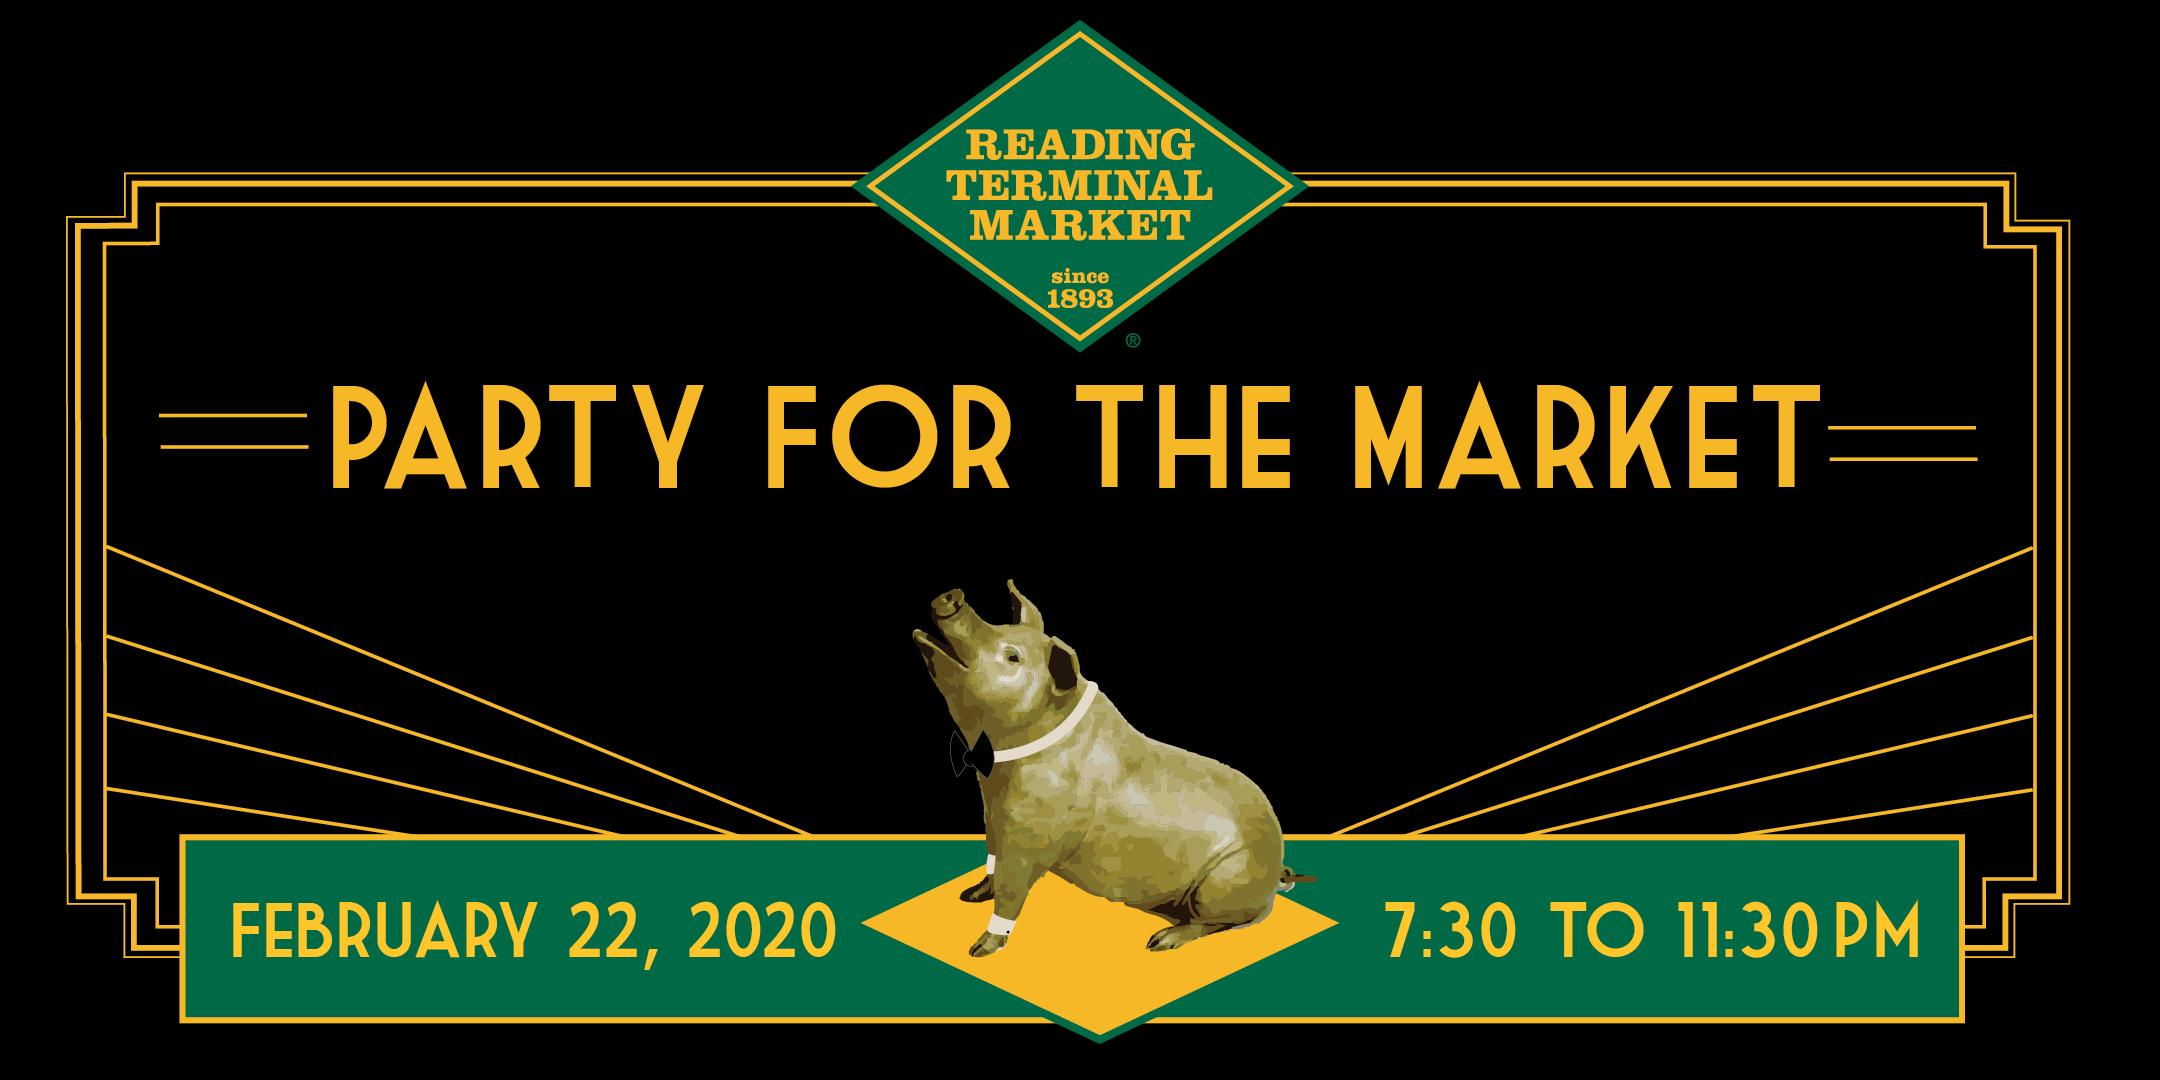 Party for the Market - Reading Terminal Market